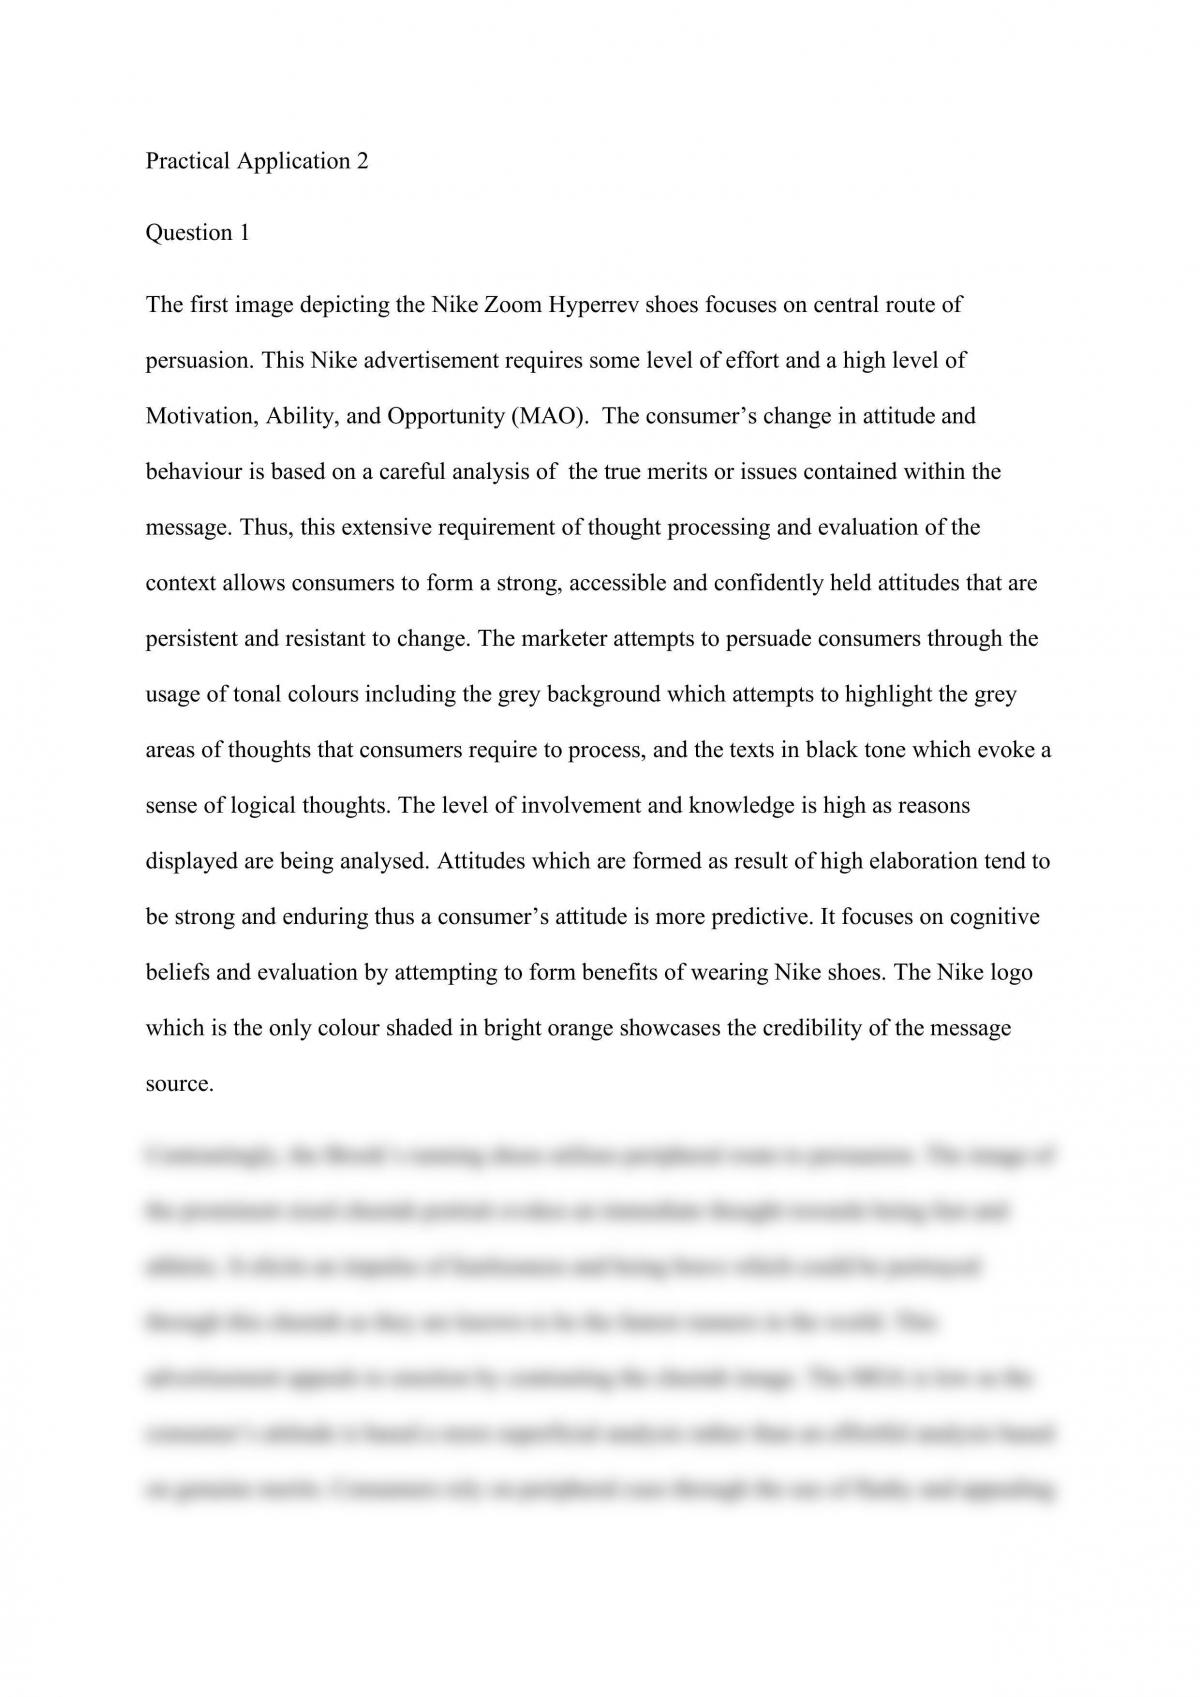 MKF2111 essay assignment of practical application 2 HD - Page 1